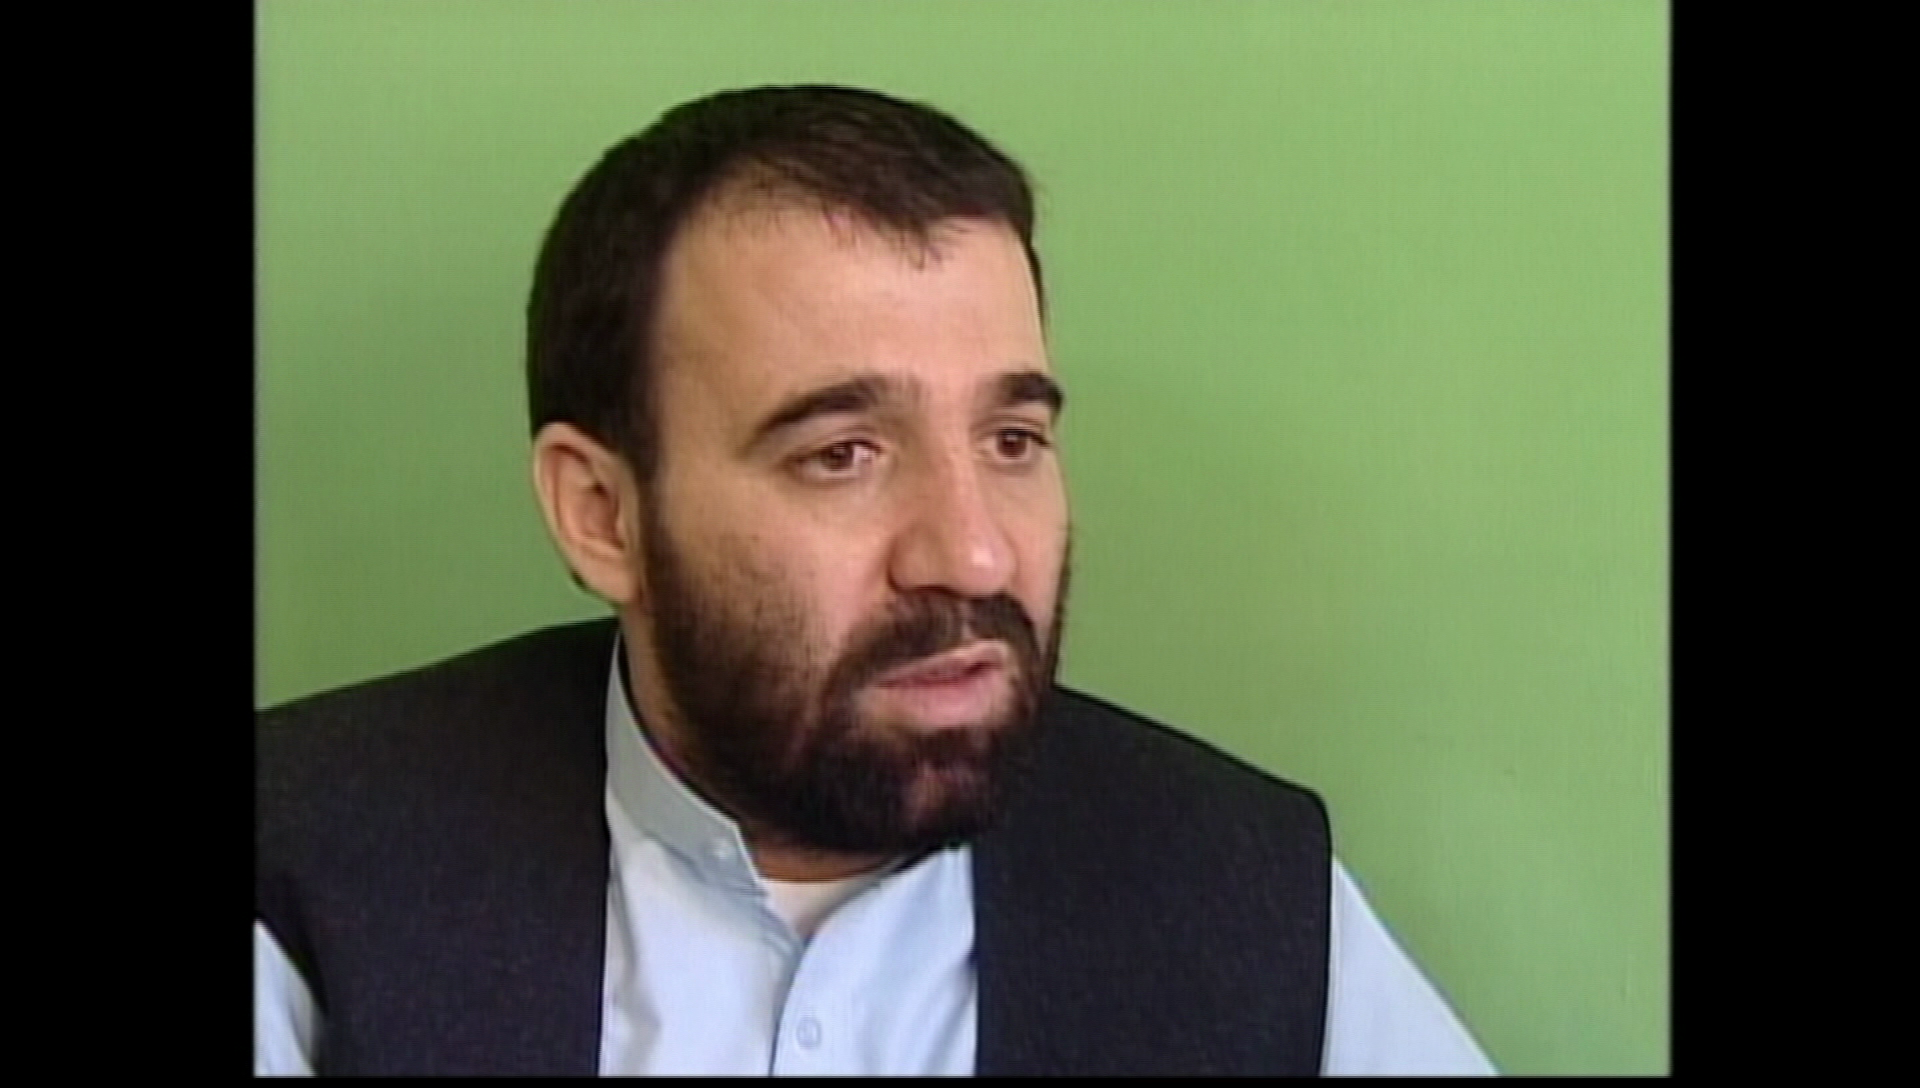 Death of <b>Ahmed Wali</b> Karzai puts fresh attention on fragile country - ahmed.wali.karzai